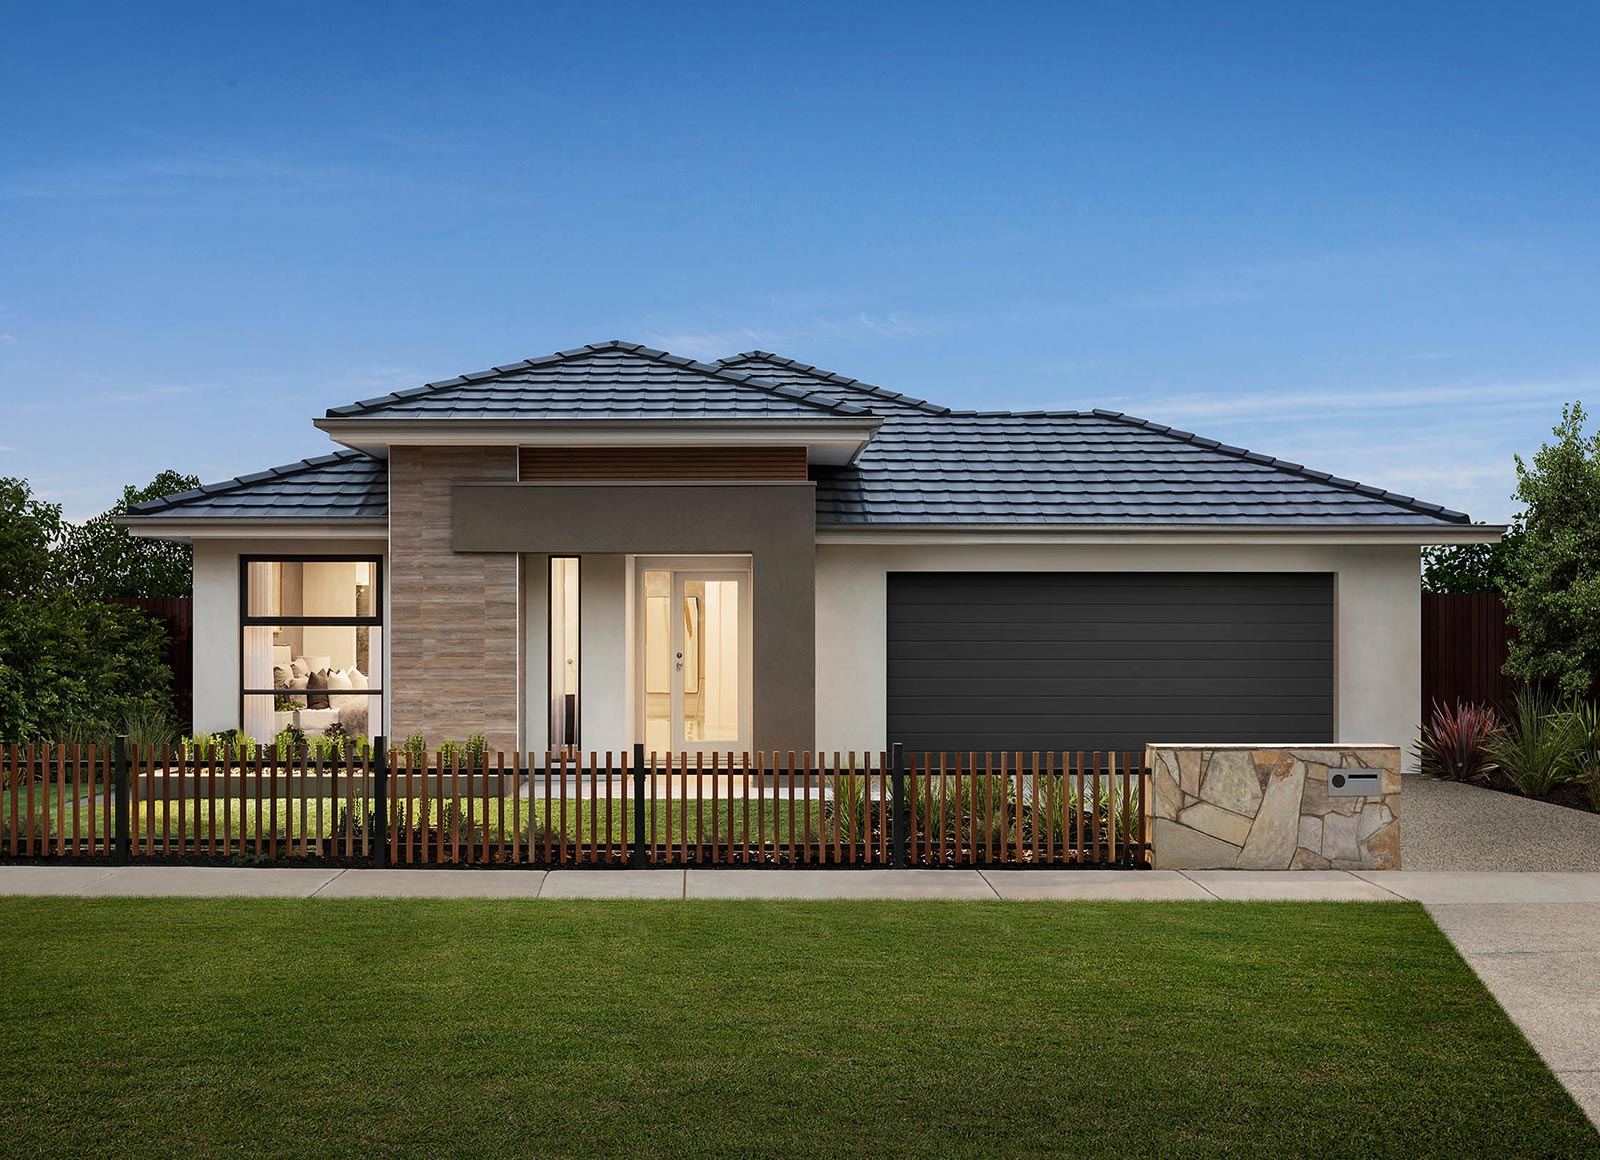 Affordable-and-Energy-Efficient-Facades-With-Hebel-Carlisle-homes-Body3-v2.jpg